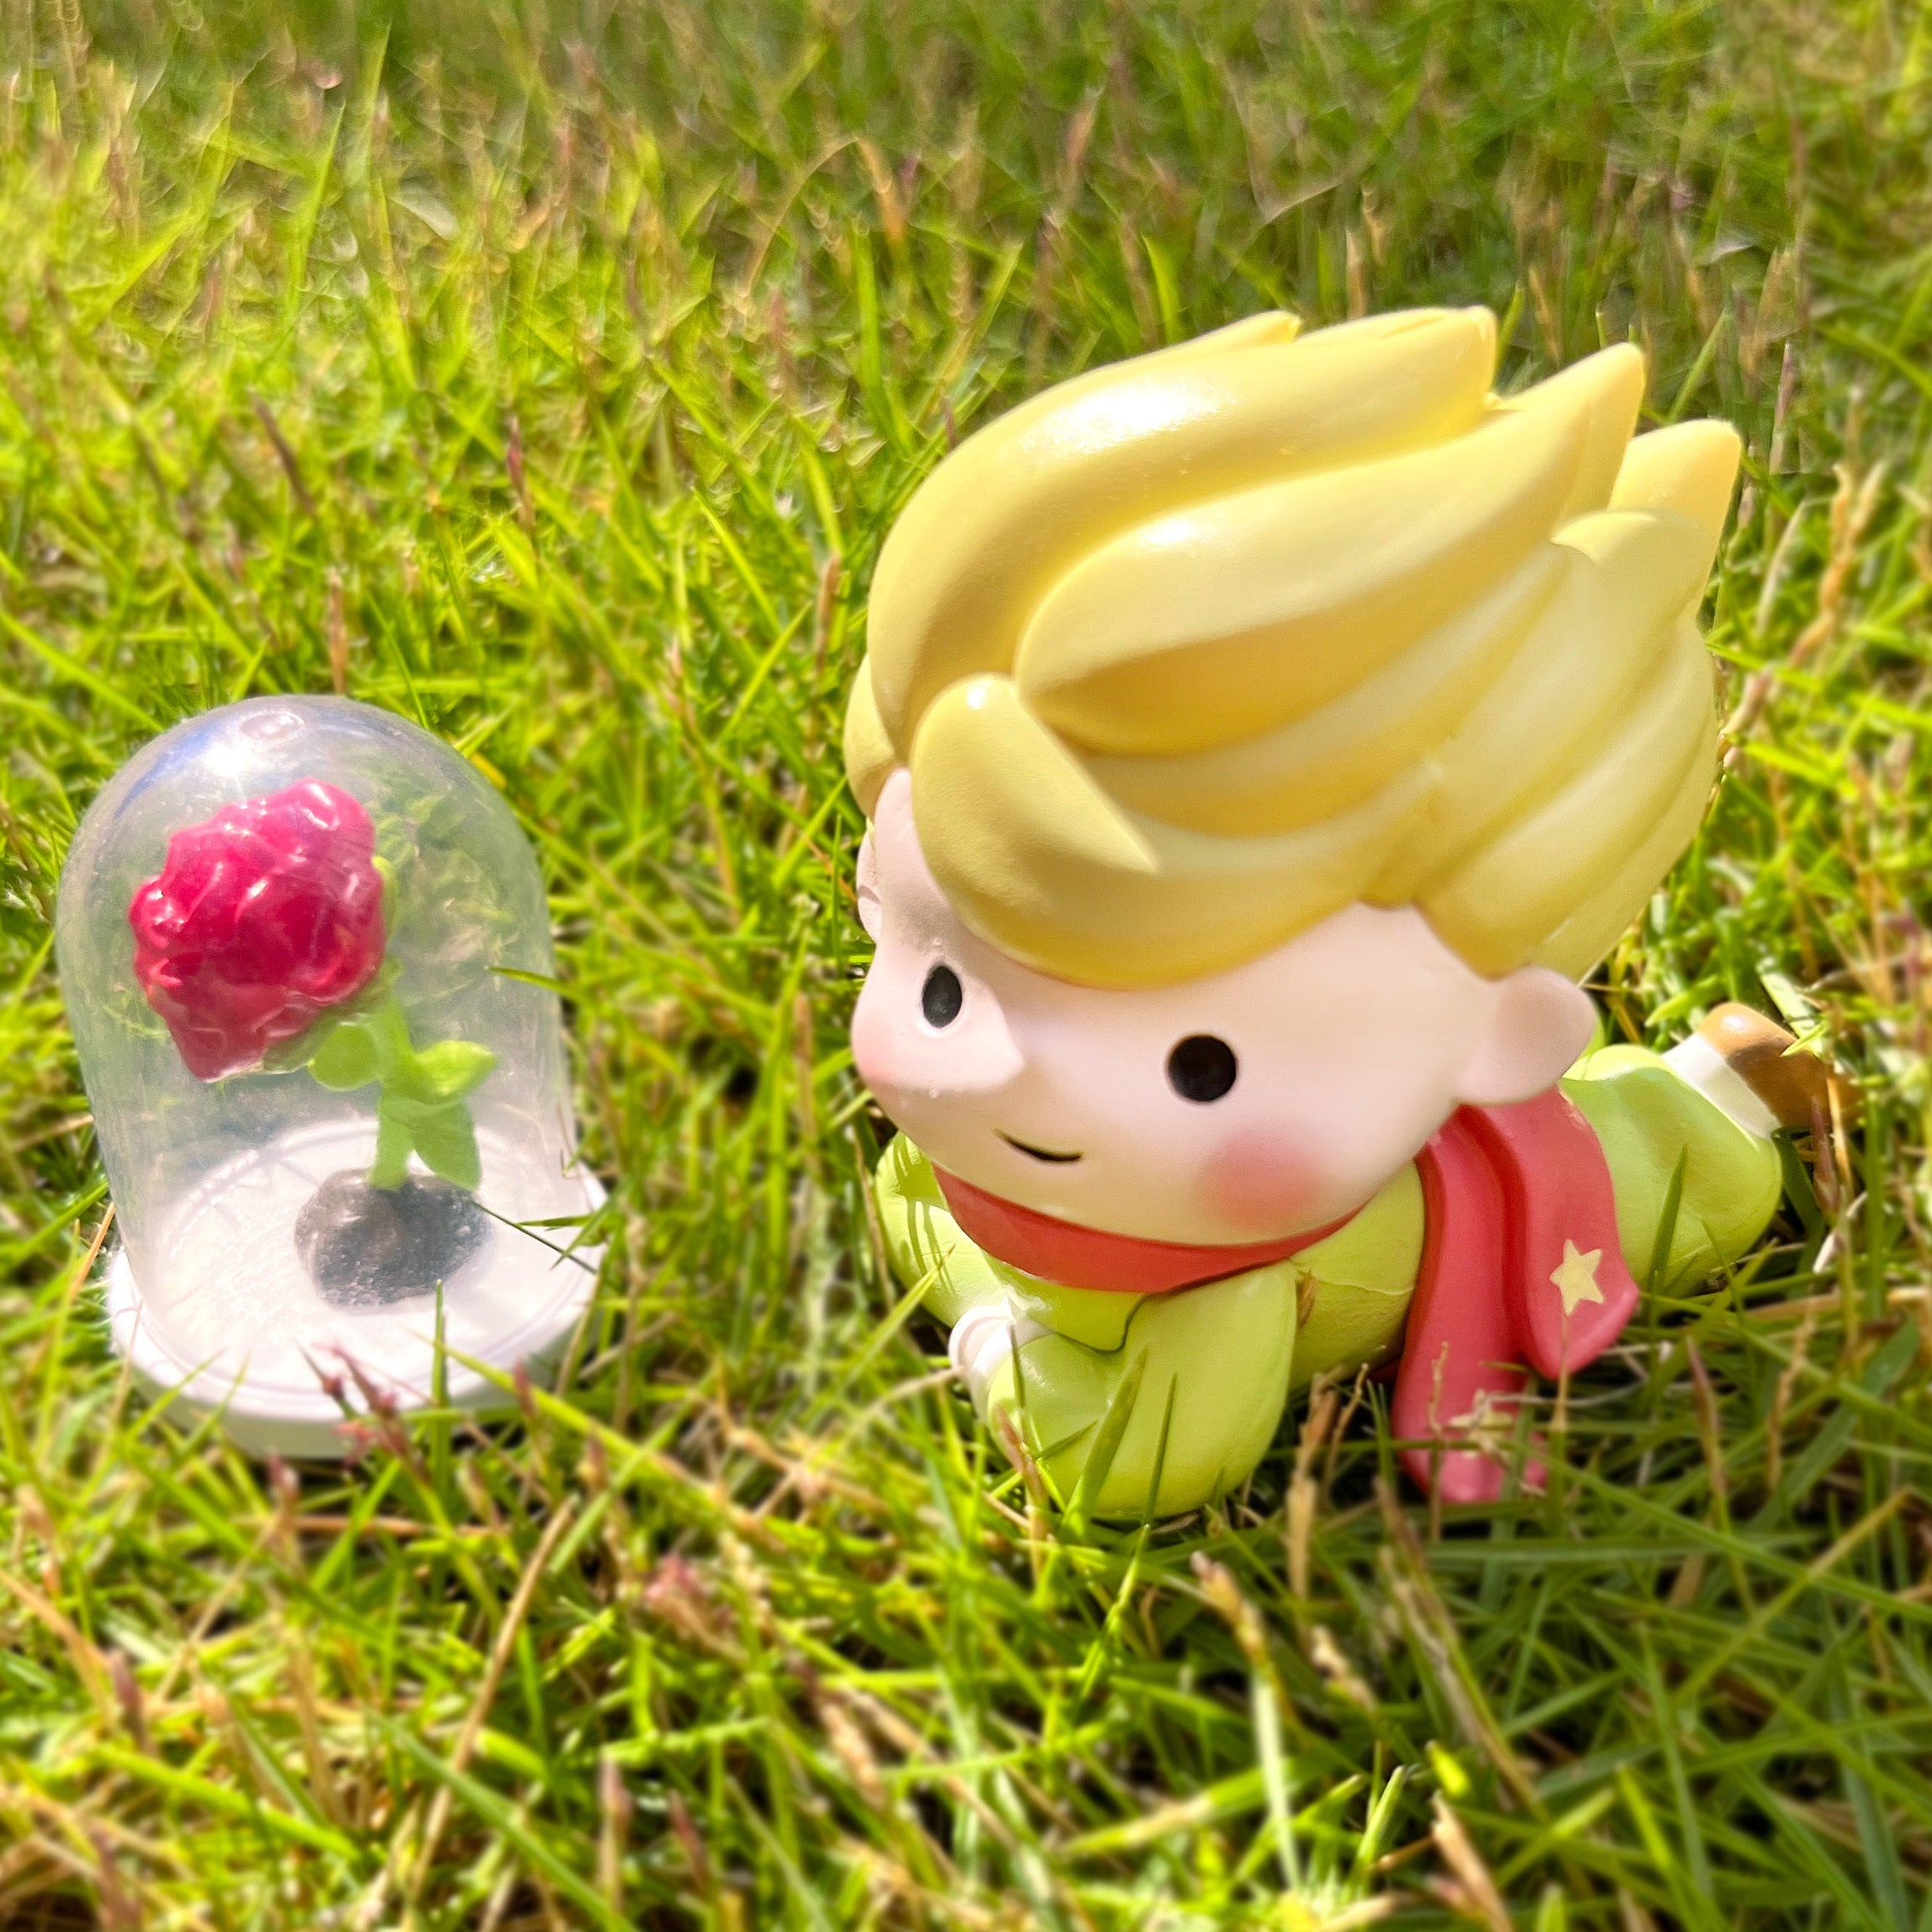 The Little Prince Gatcha Series